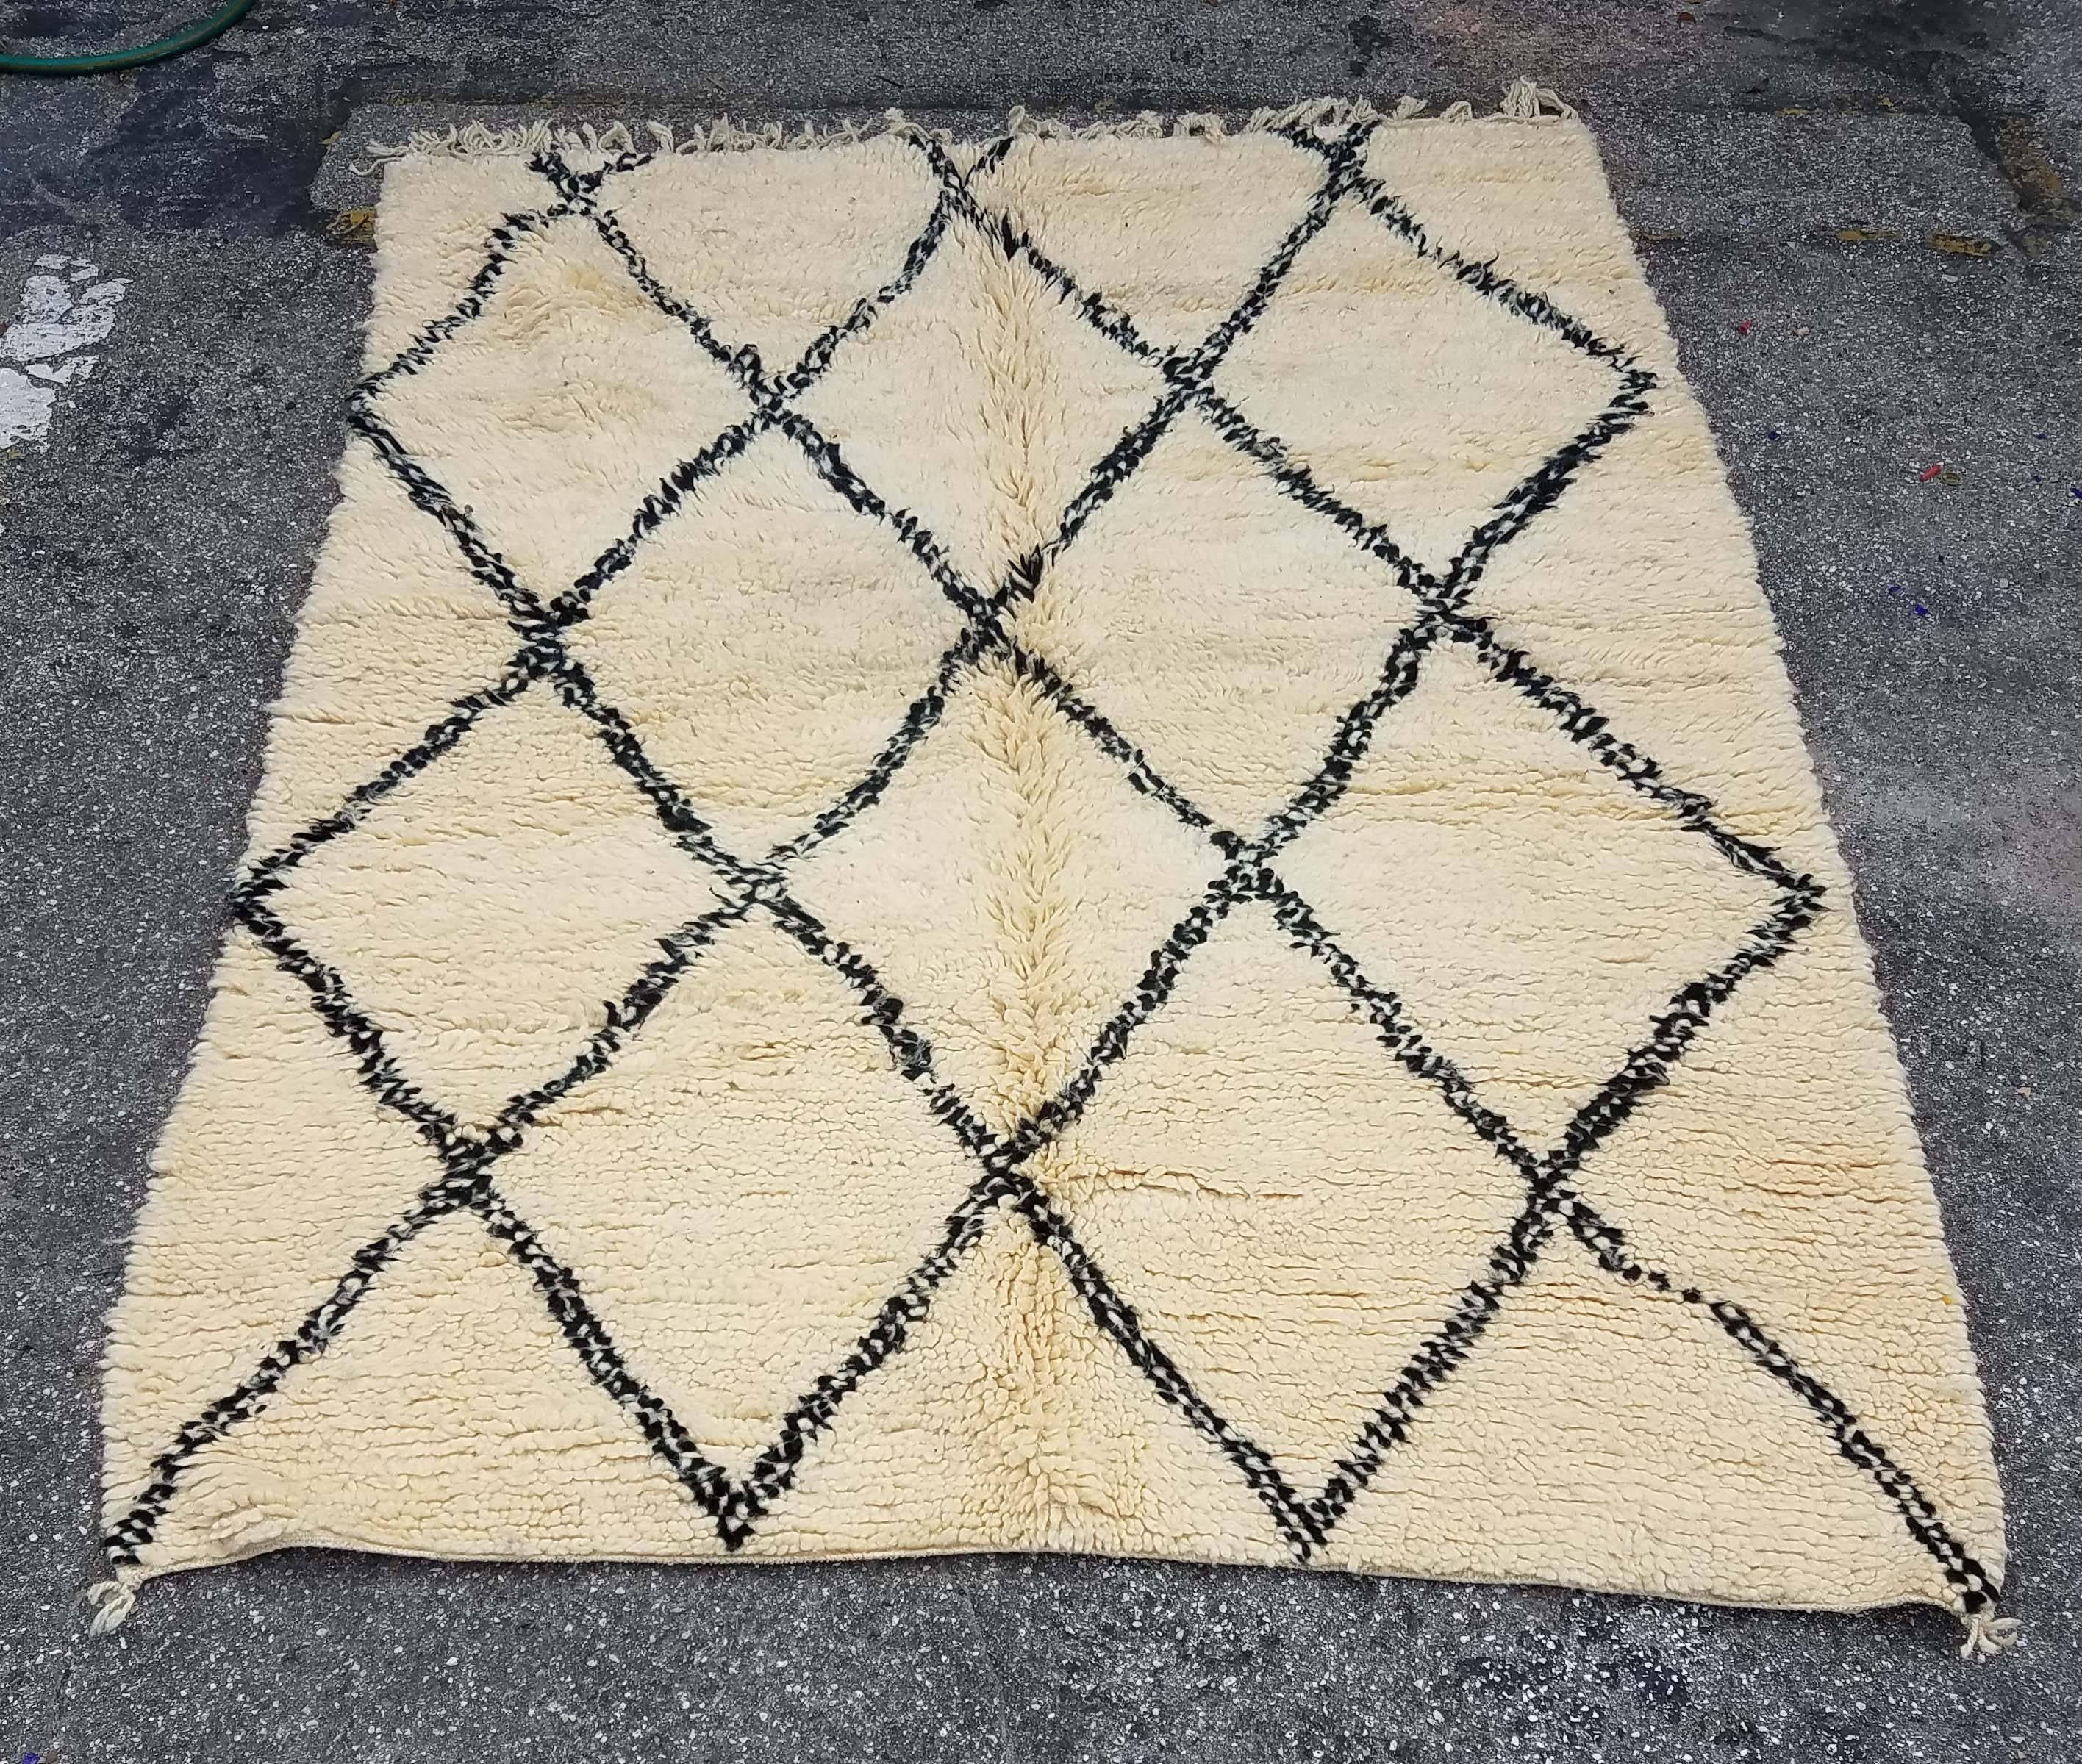 Moroccan black / white Beni Ourain rug. Made of pure wool. Excellent handcraftsmanship. Priced to sell. Measuring approximately 7 feet long and 5 feet wide, this amazing rug from the Atlas mountains of Morocco will be a great addition to your home